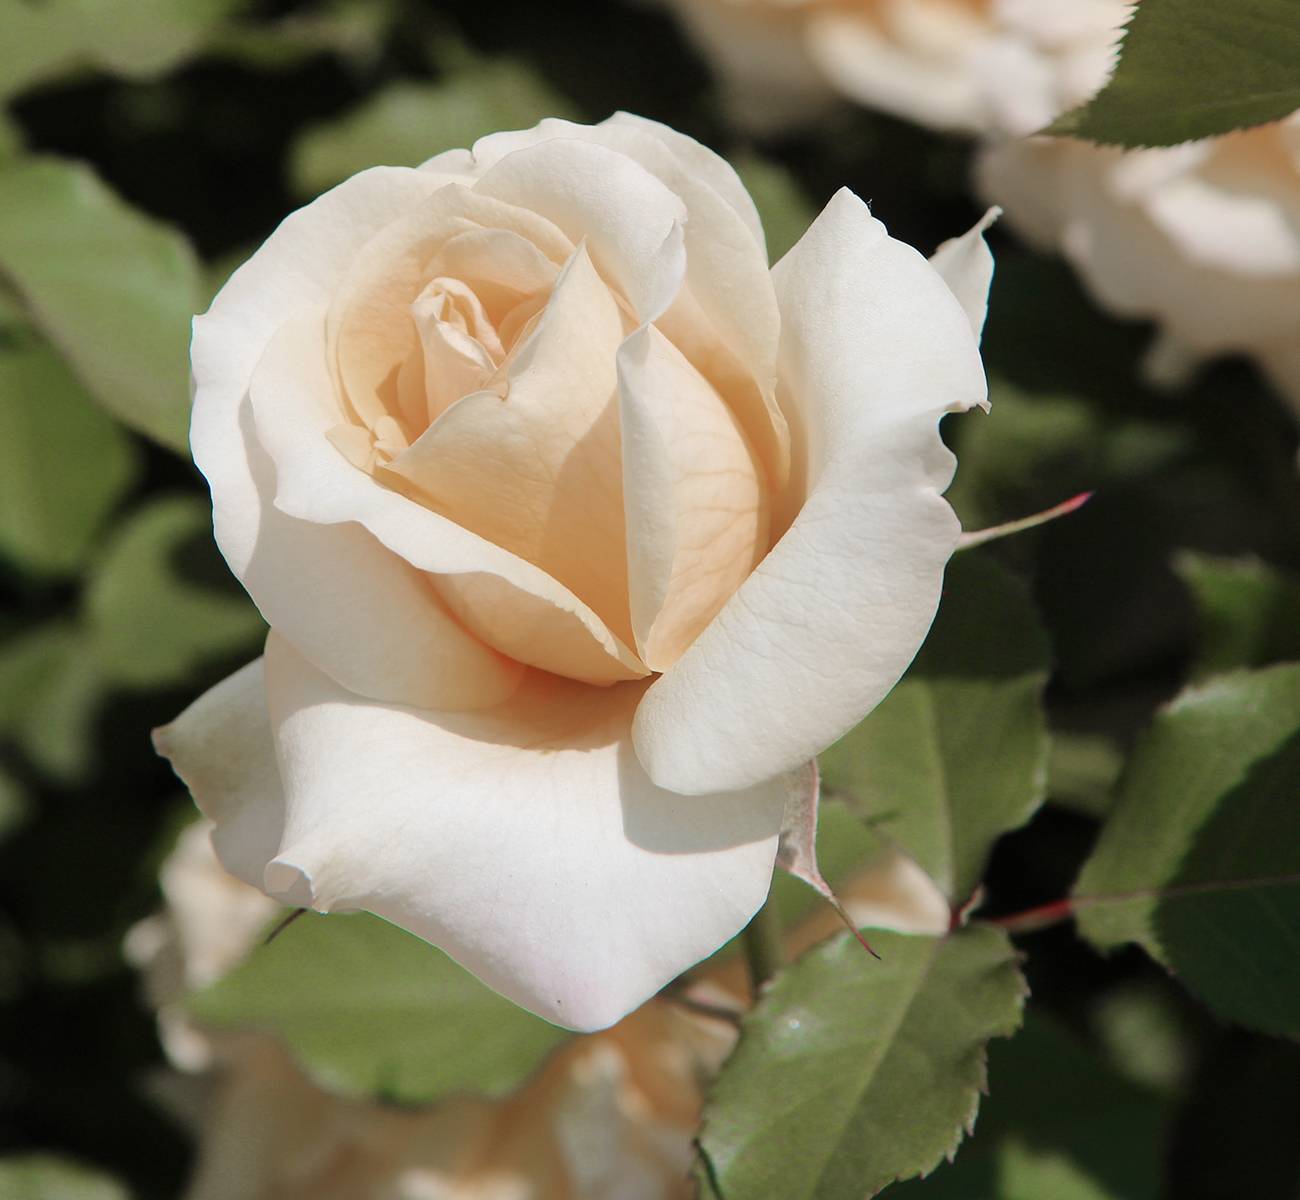 Photograph of a blooming white rose 